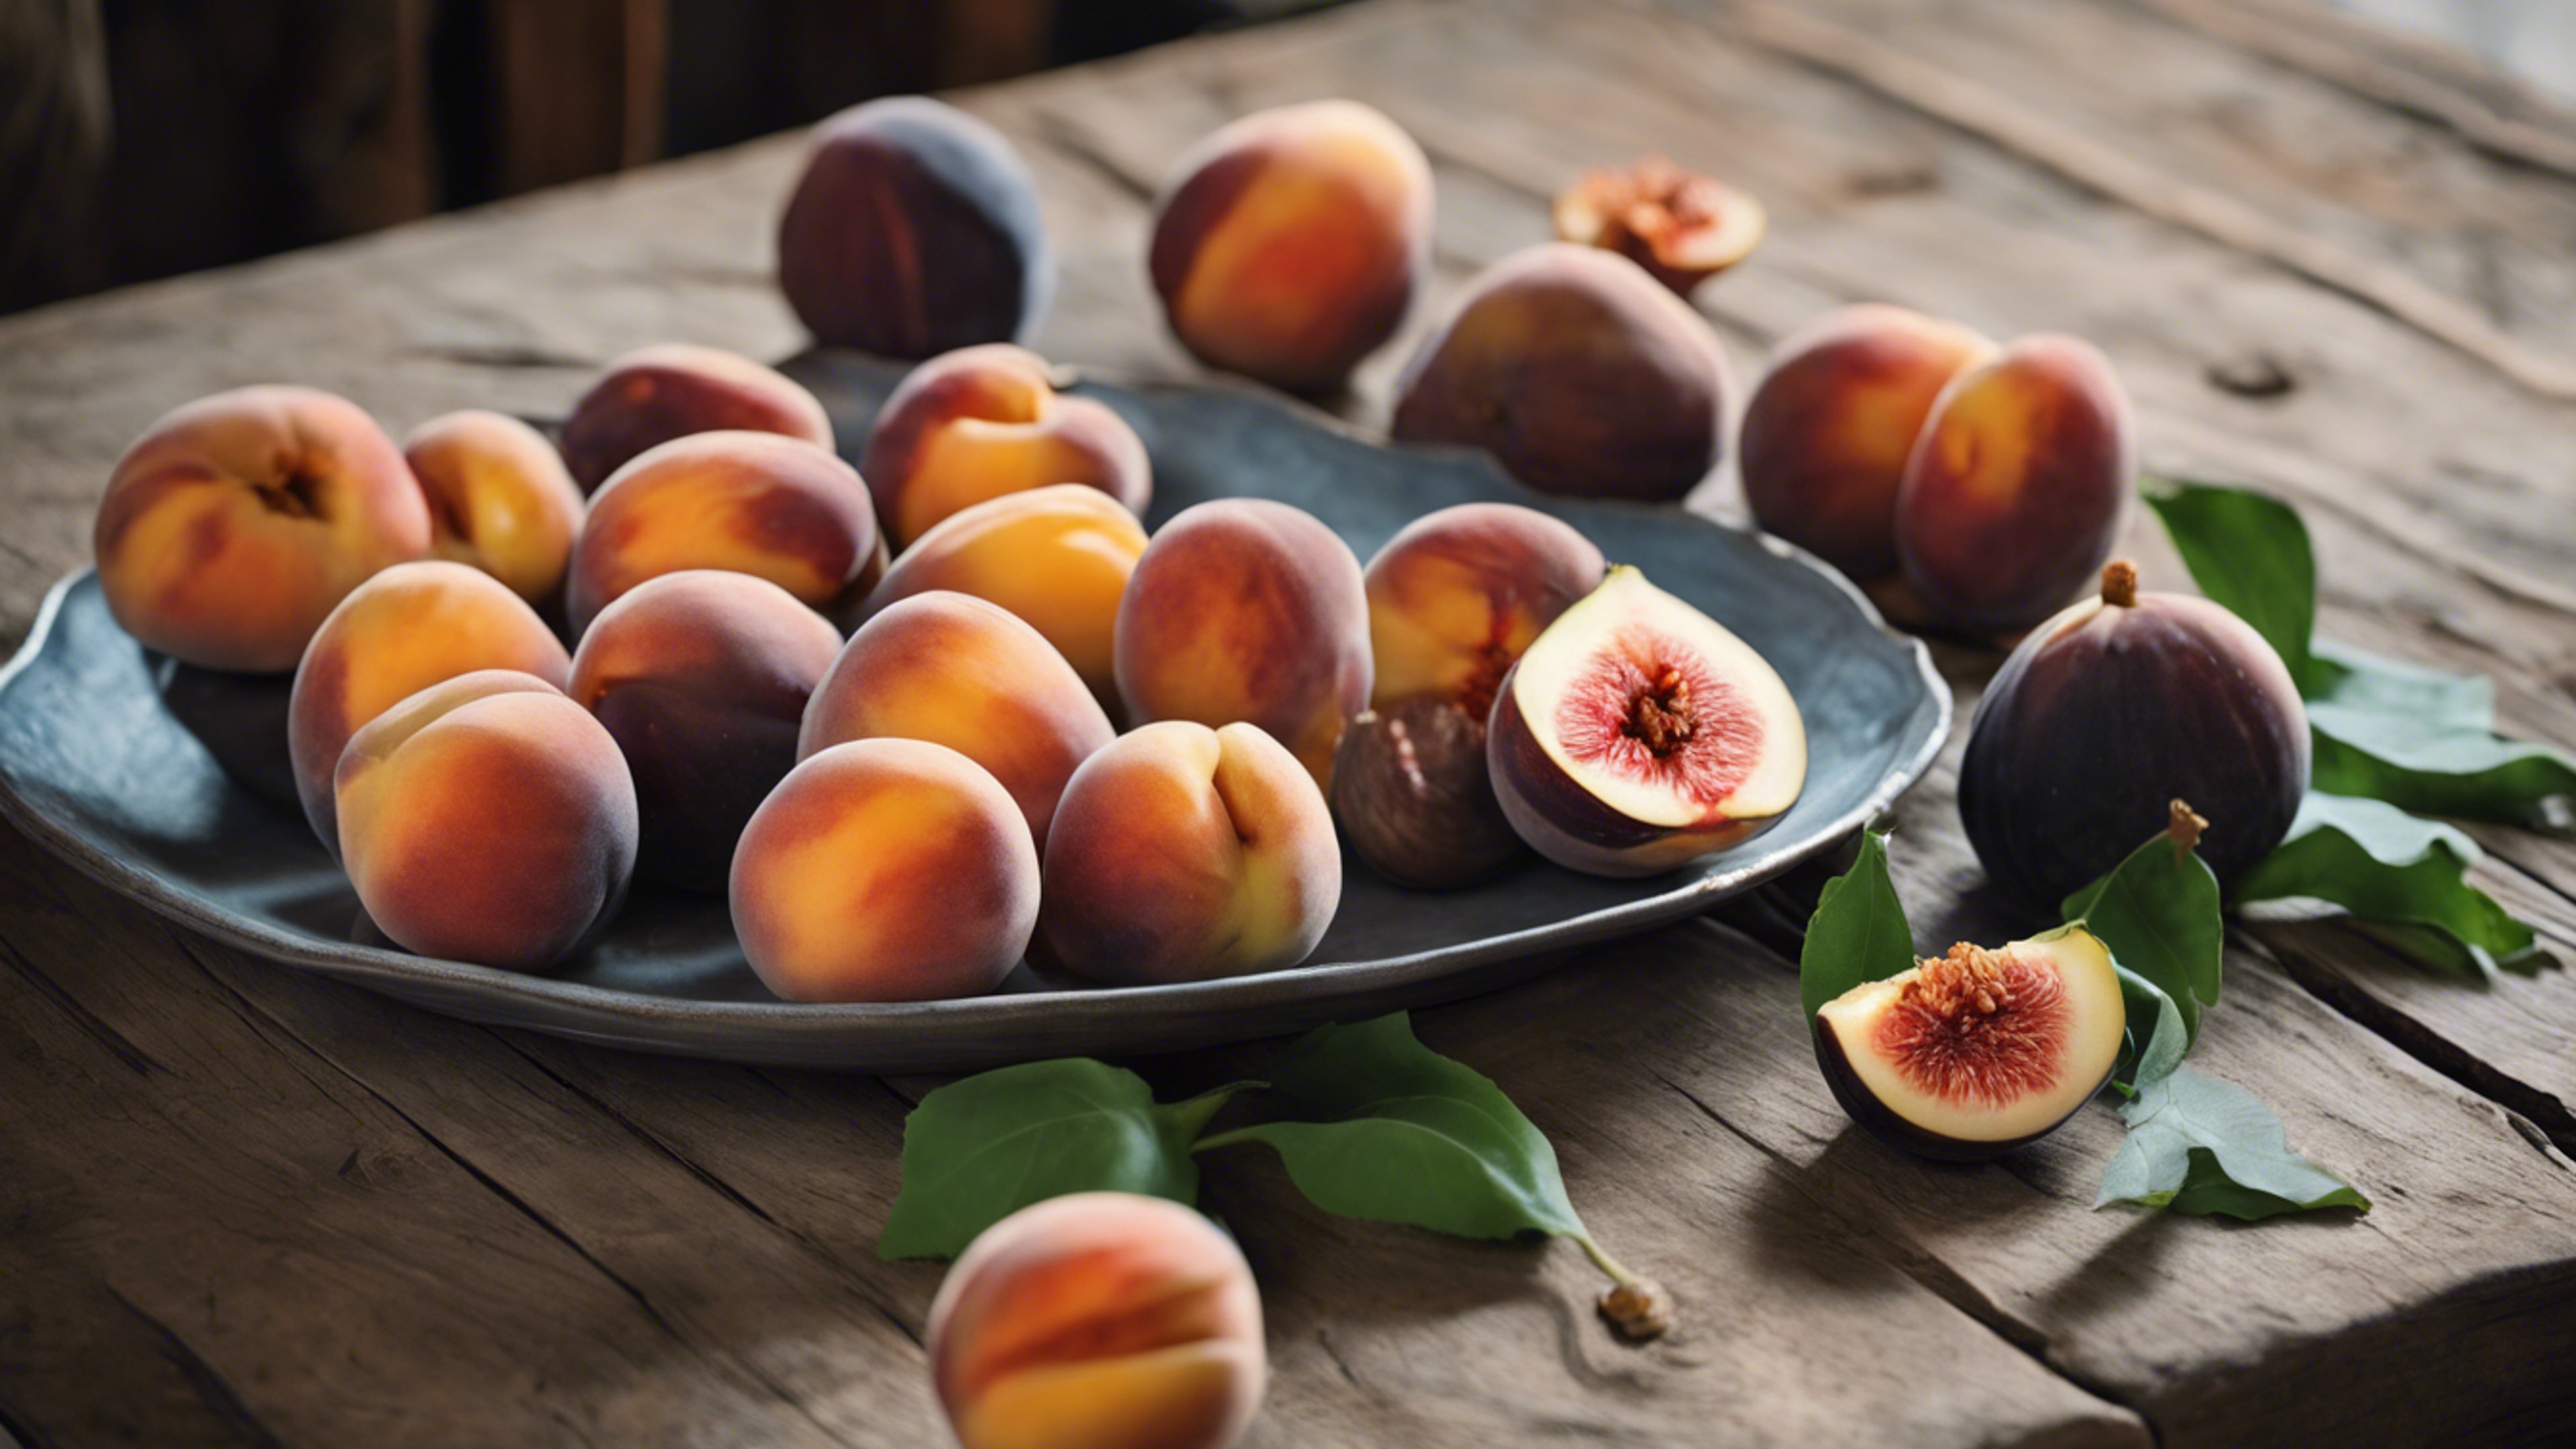 Still life of peaches and figs arranged beautifully on a rustic wooden table. Sfondo[c31d3ce6096543dcac89]